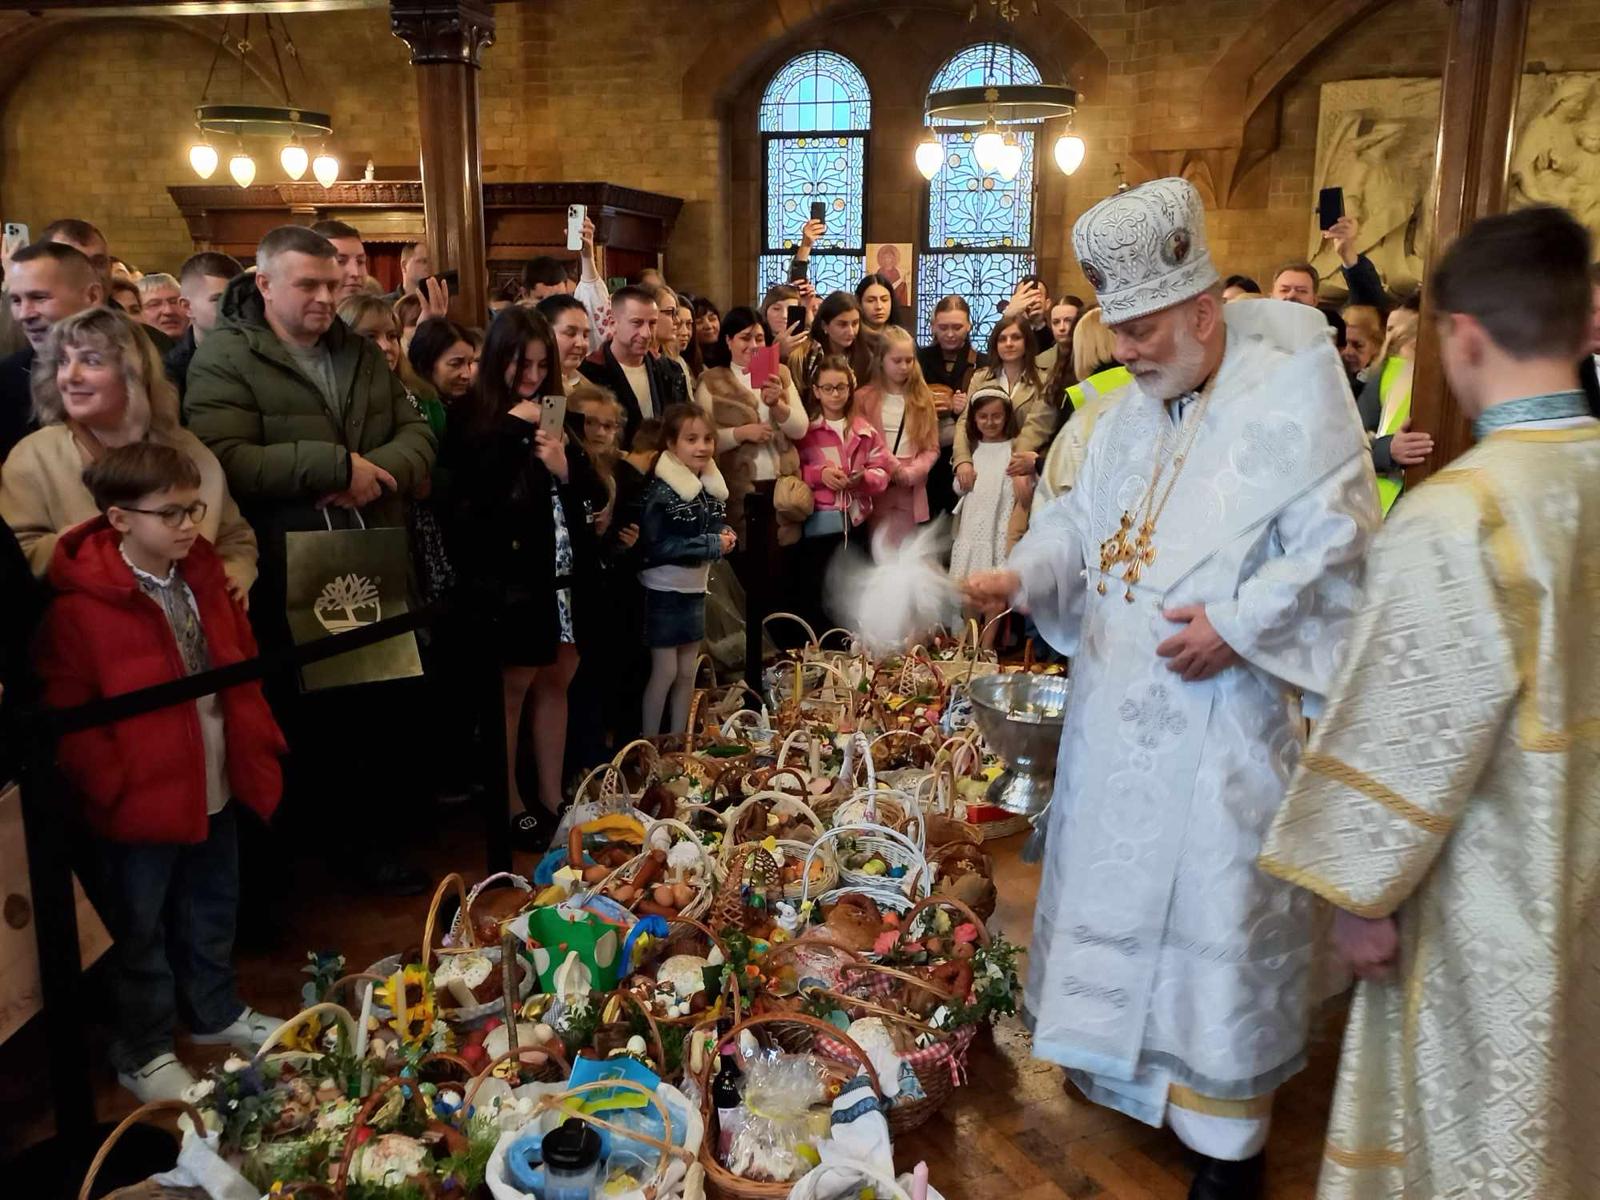 Crowds gather at the Cathedral of the Holy Family in central London for Easter